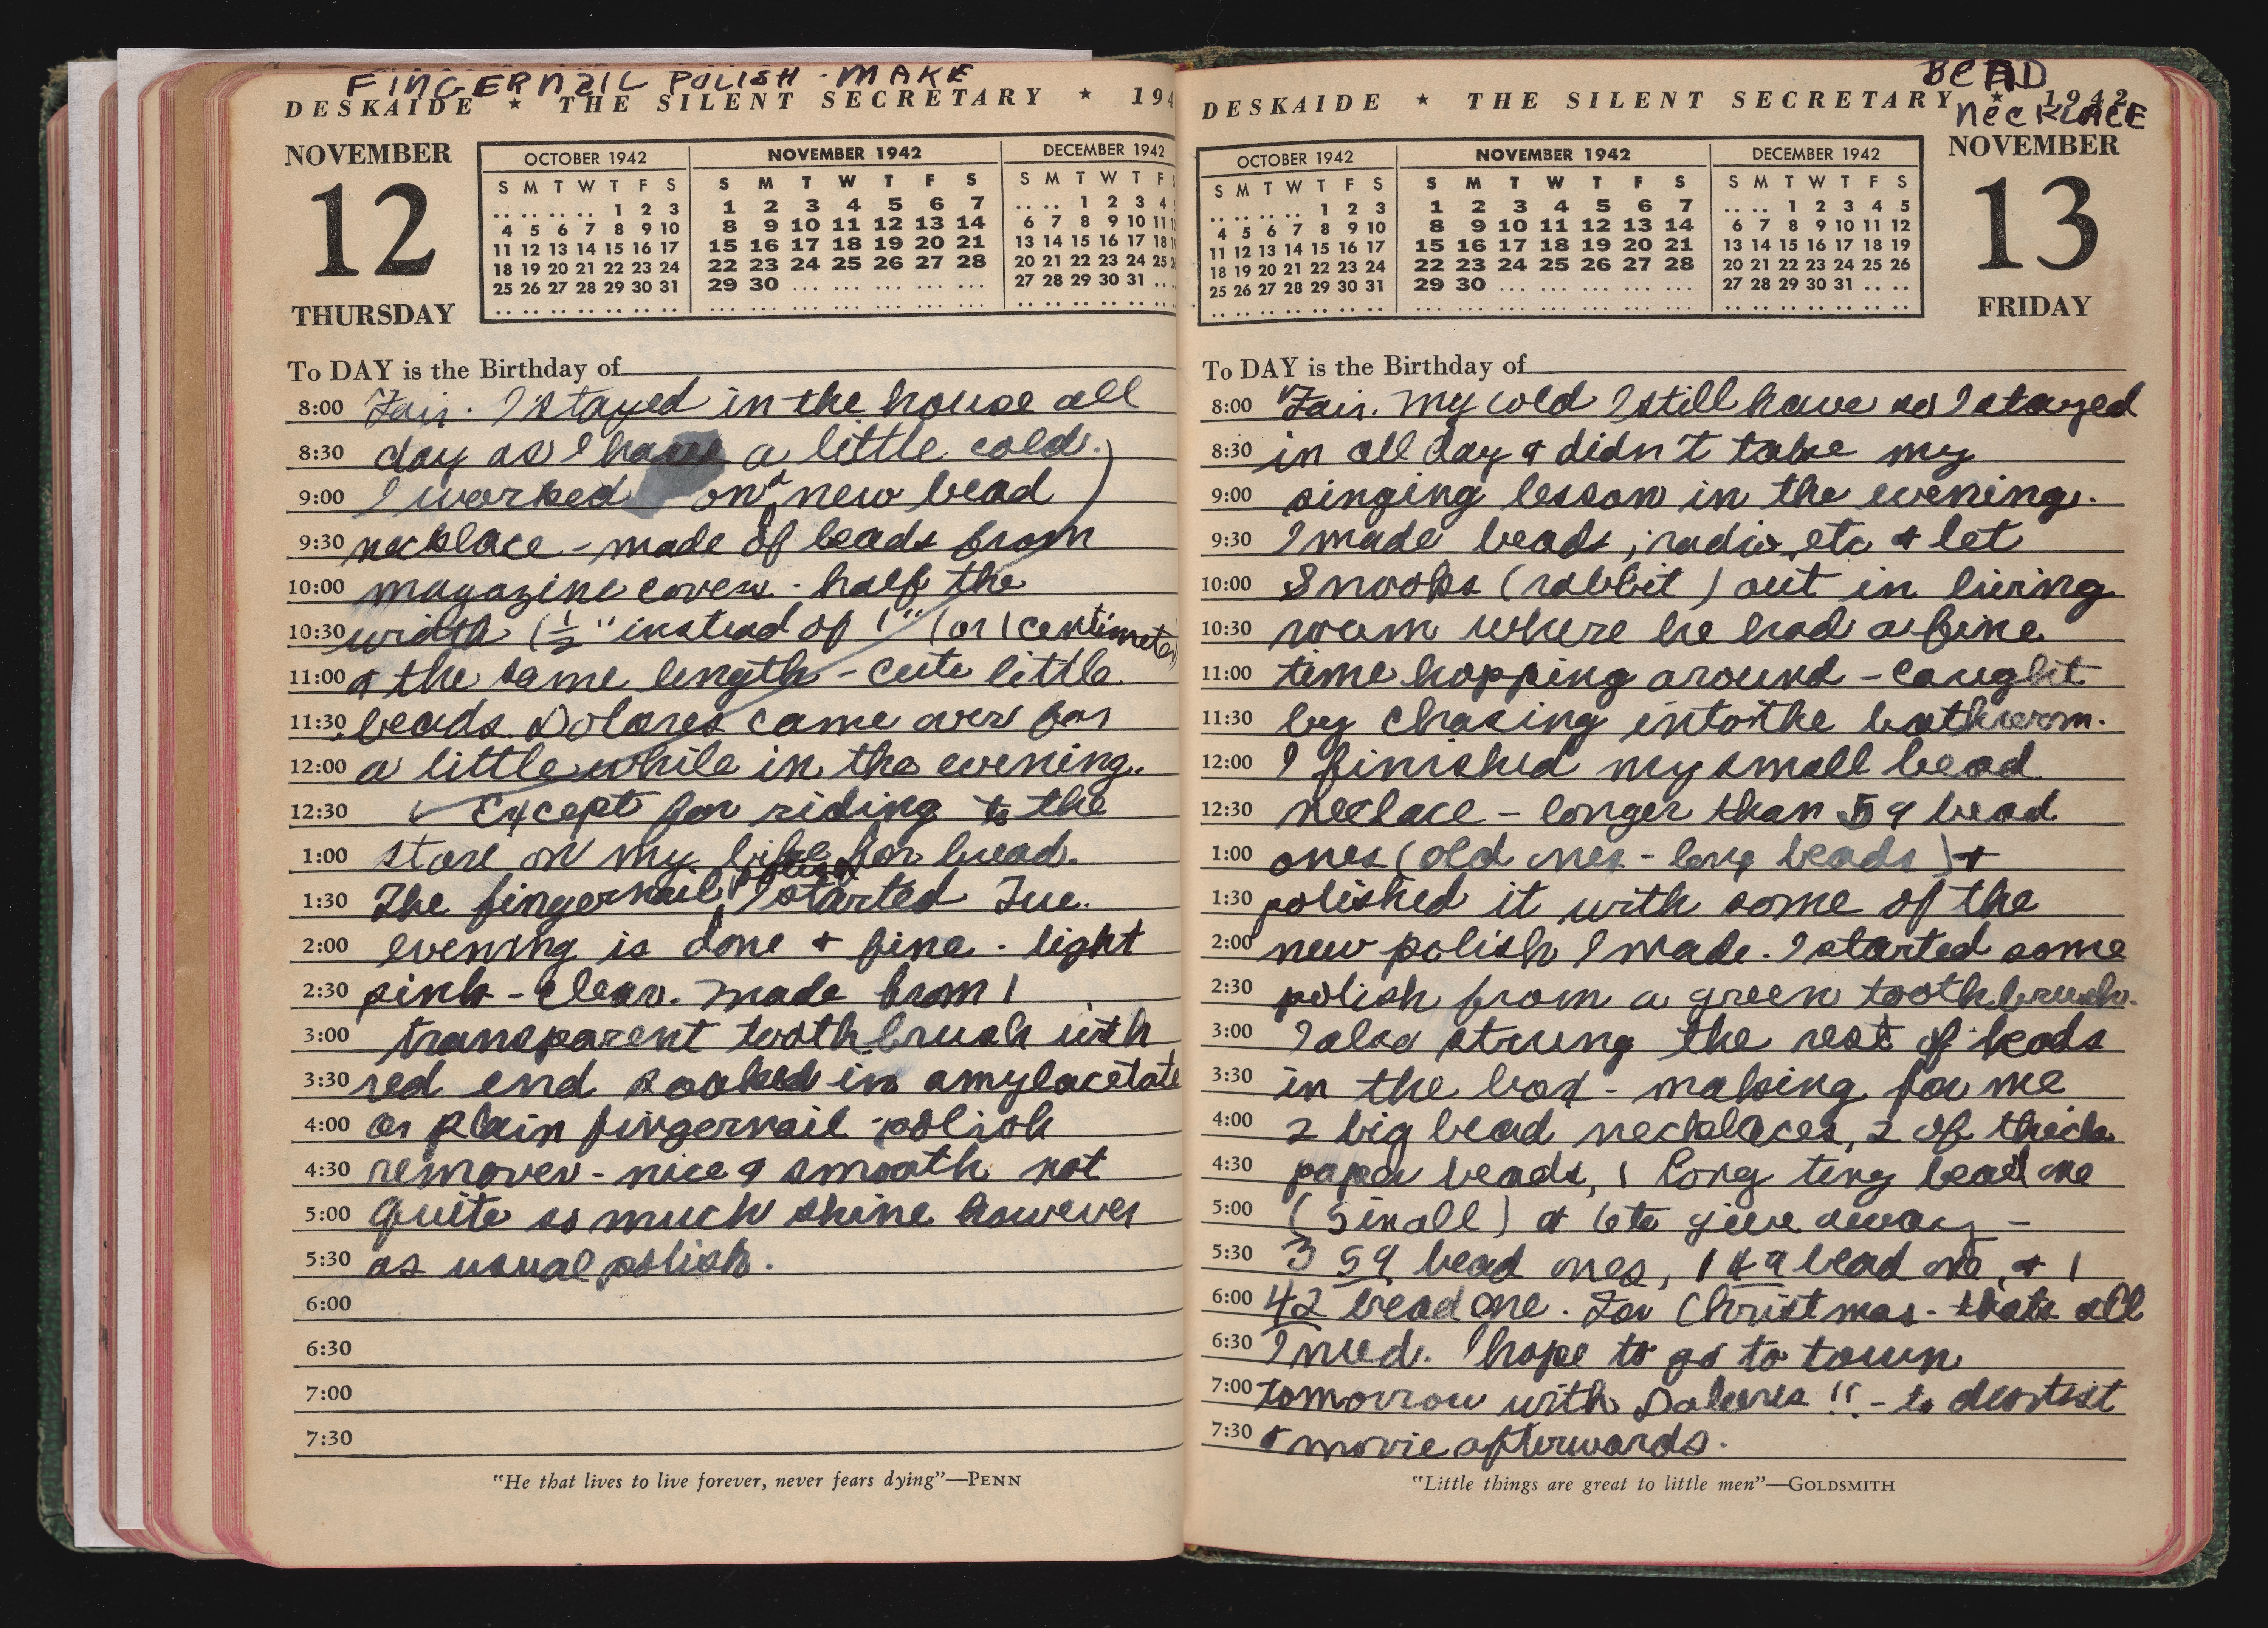 Written diary entry by Doris Sidney Blake, November 12-13, 1942. Contains text about mixing nail pol